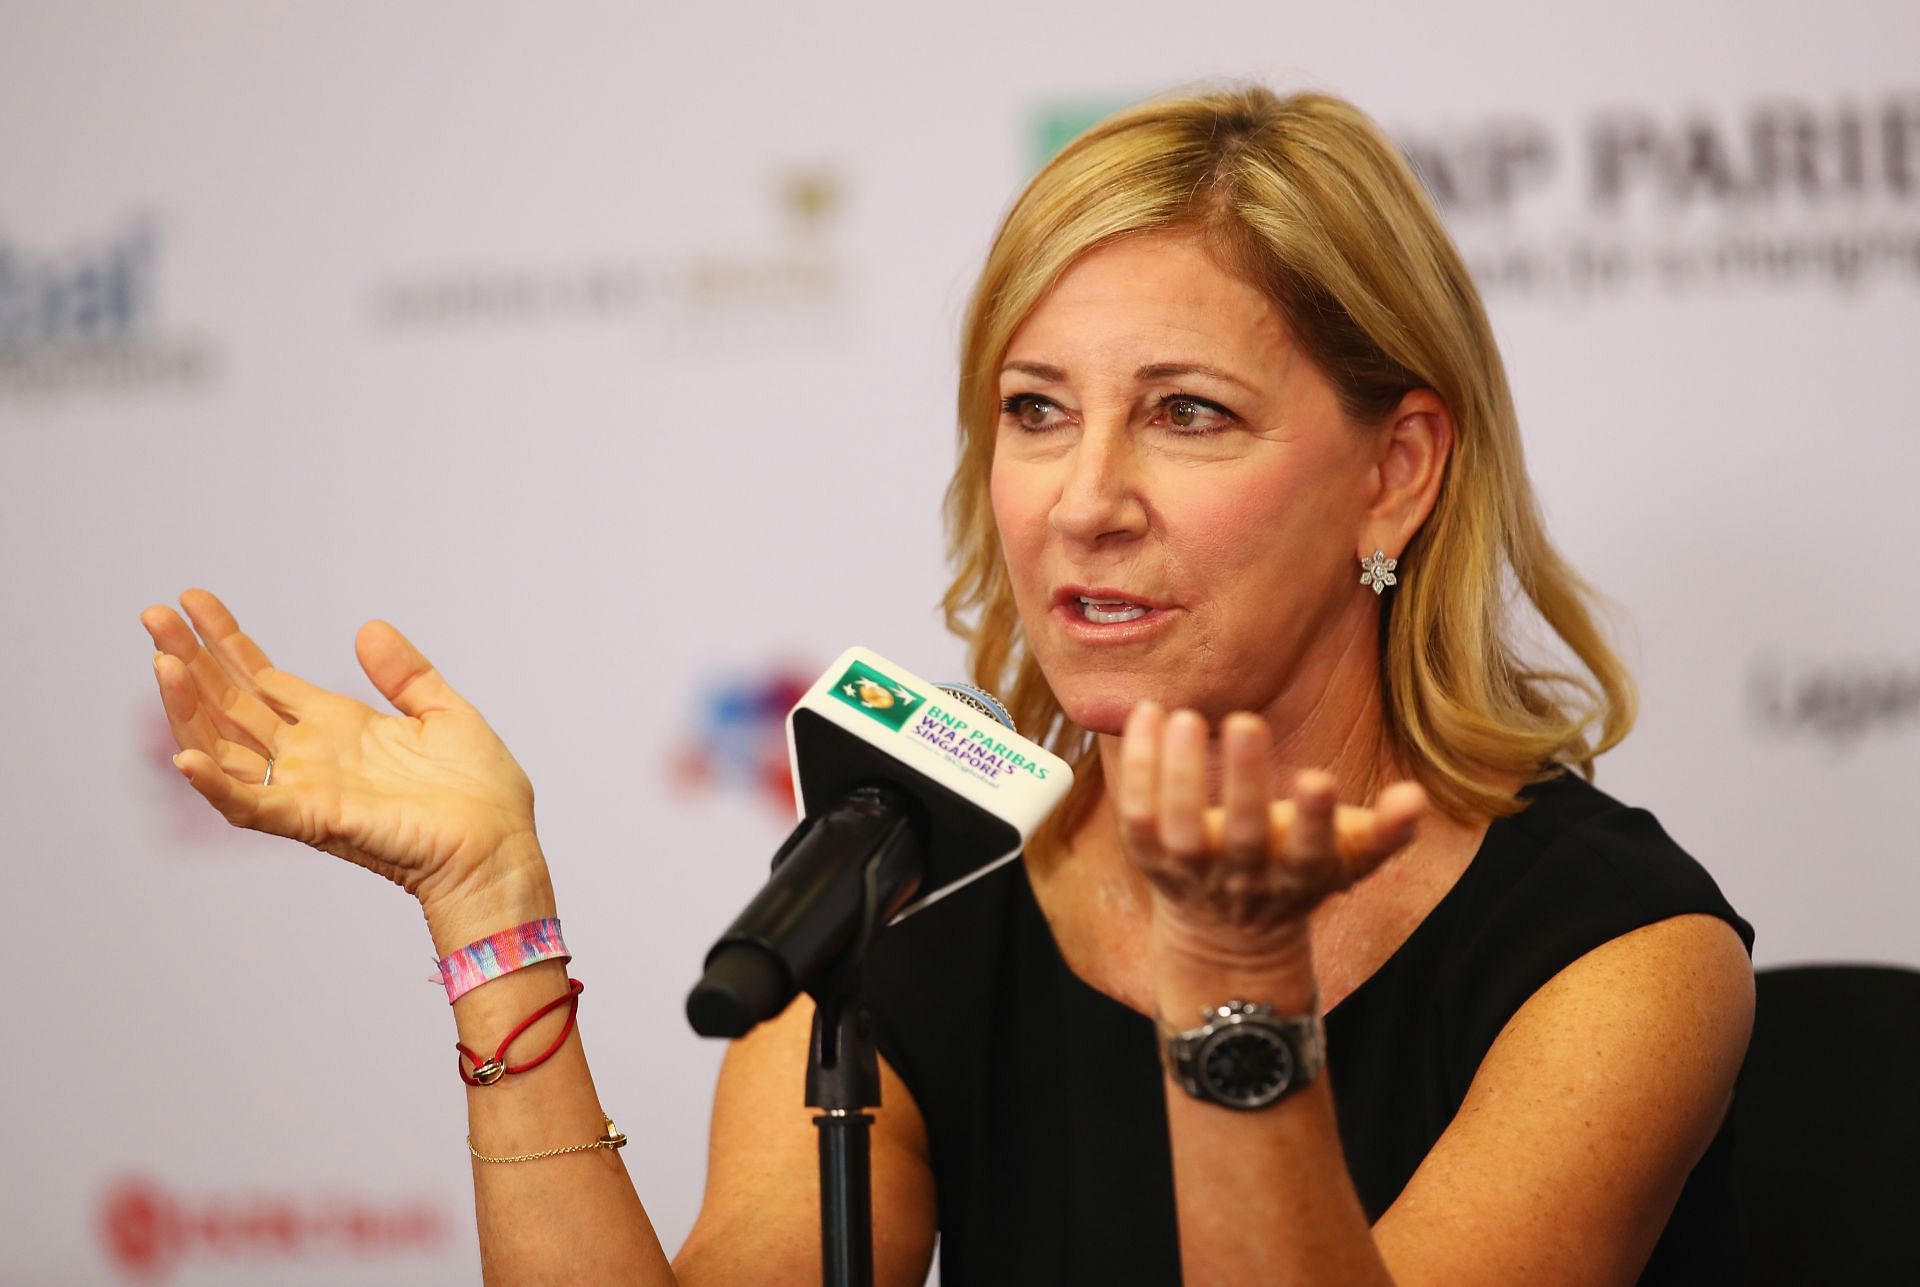 Chris Evert shows support for Prince Harry